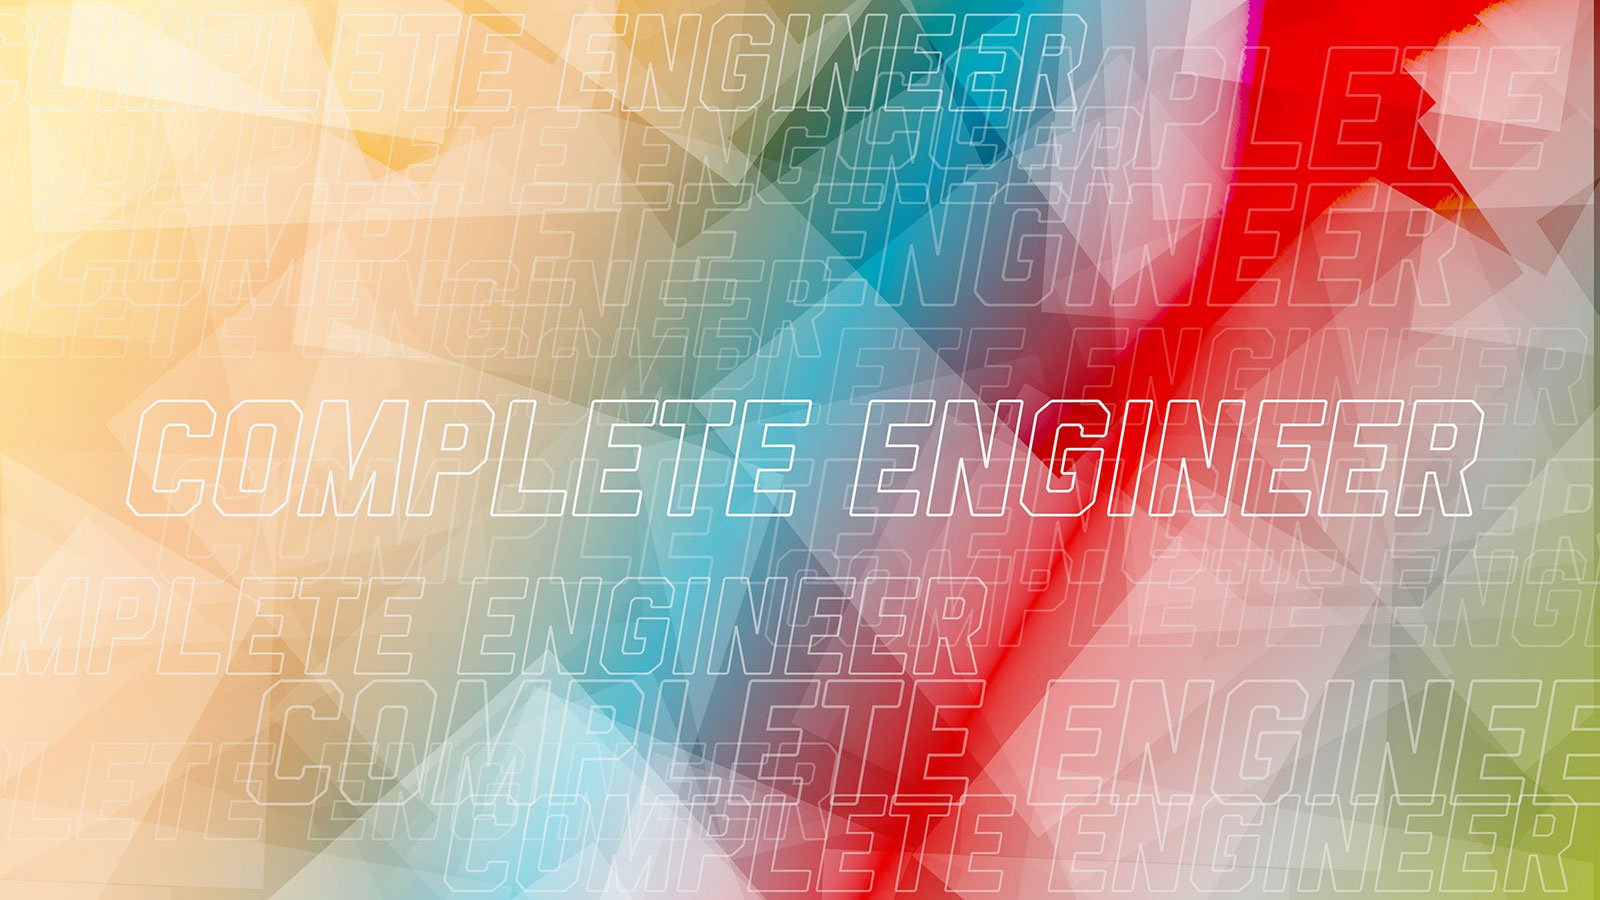 The words 'Complete Engineer' written over a colorful background.